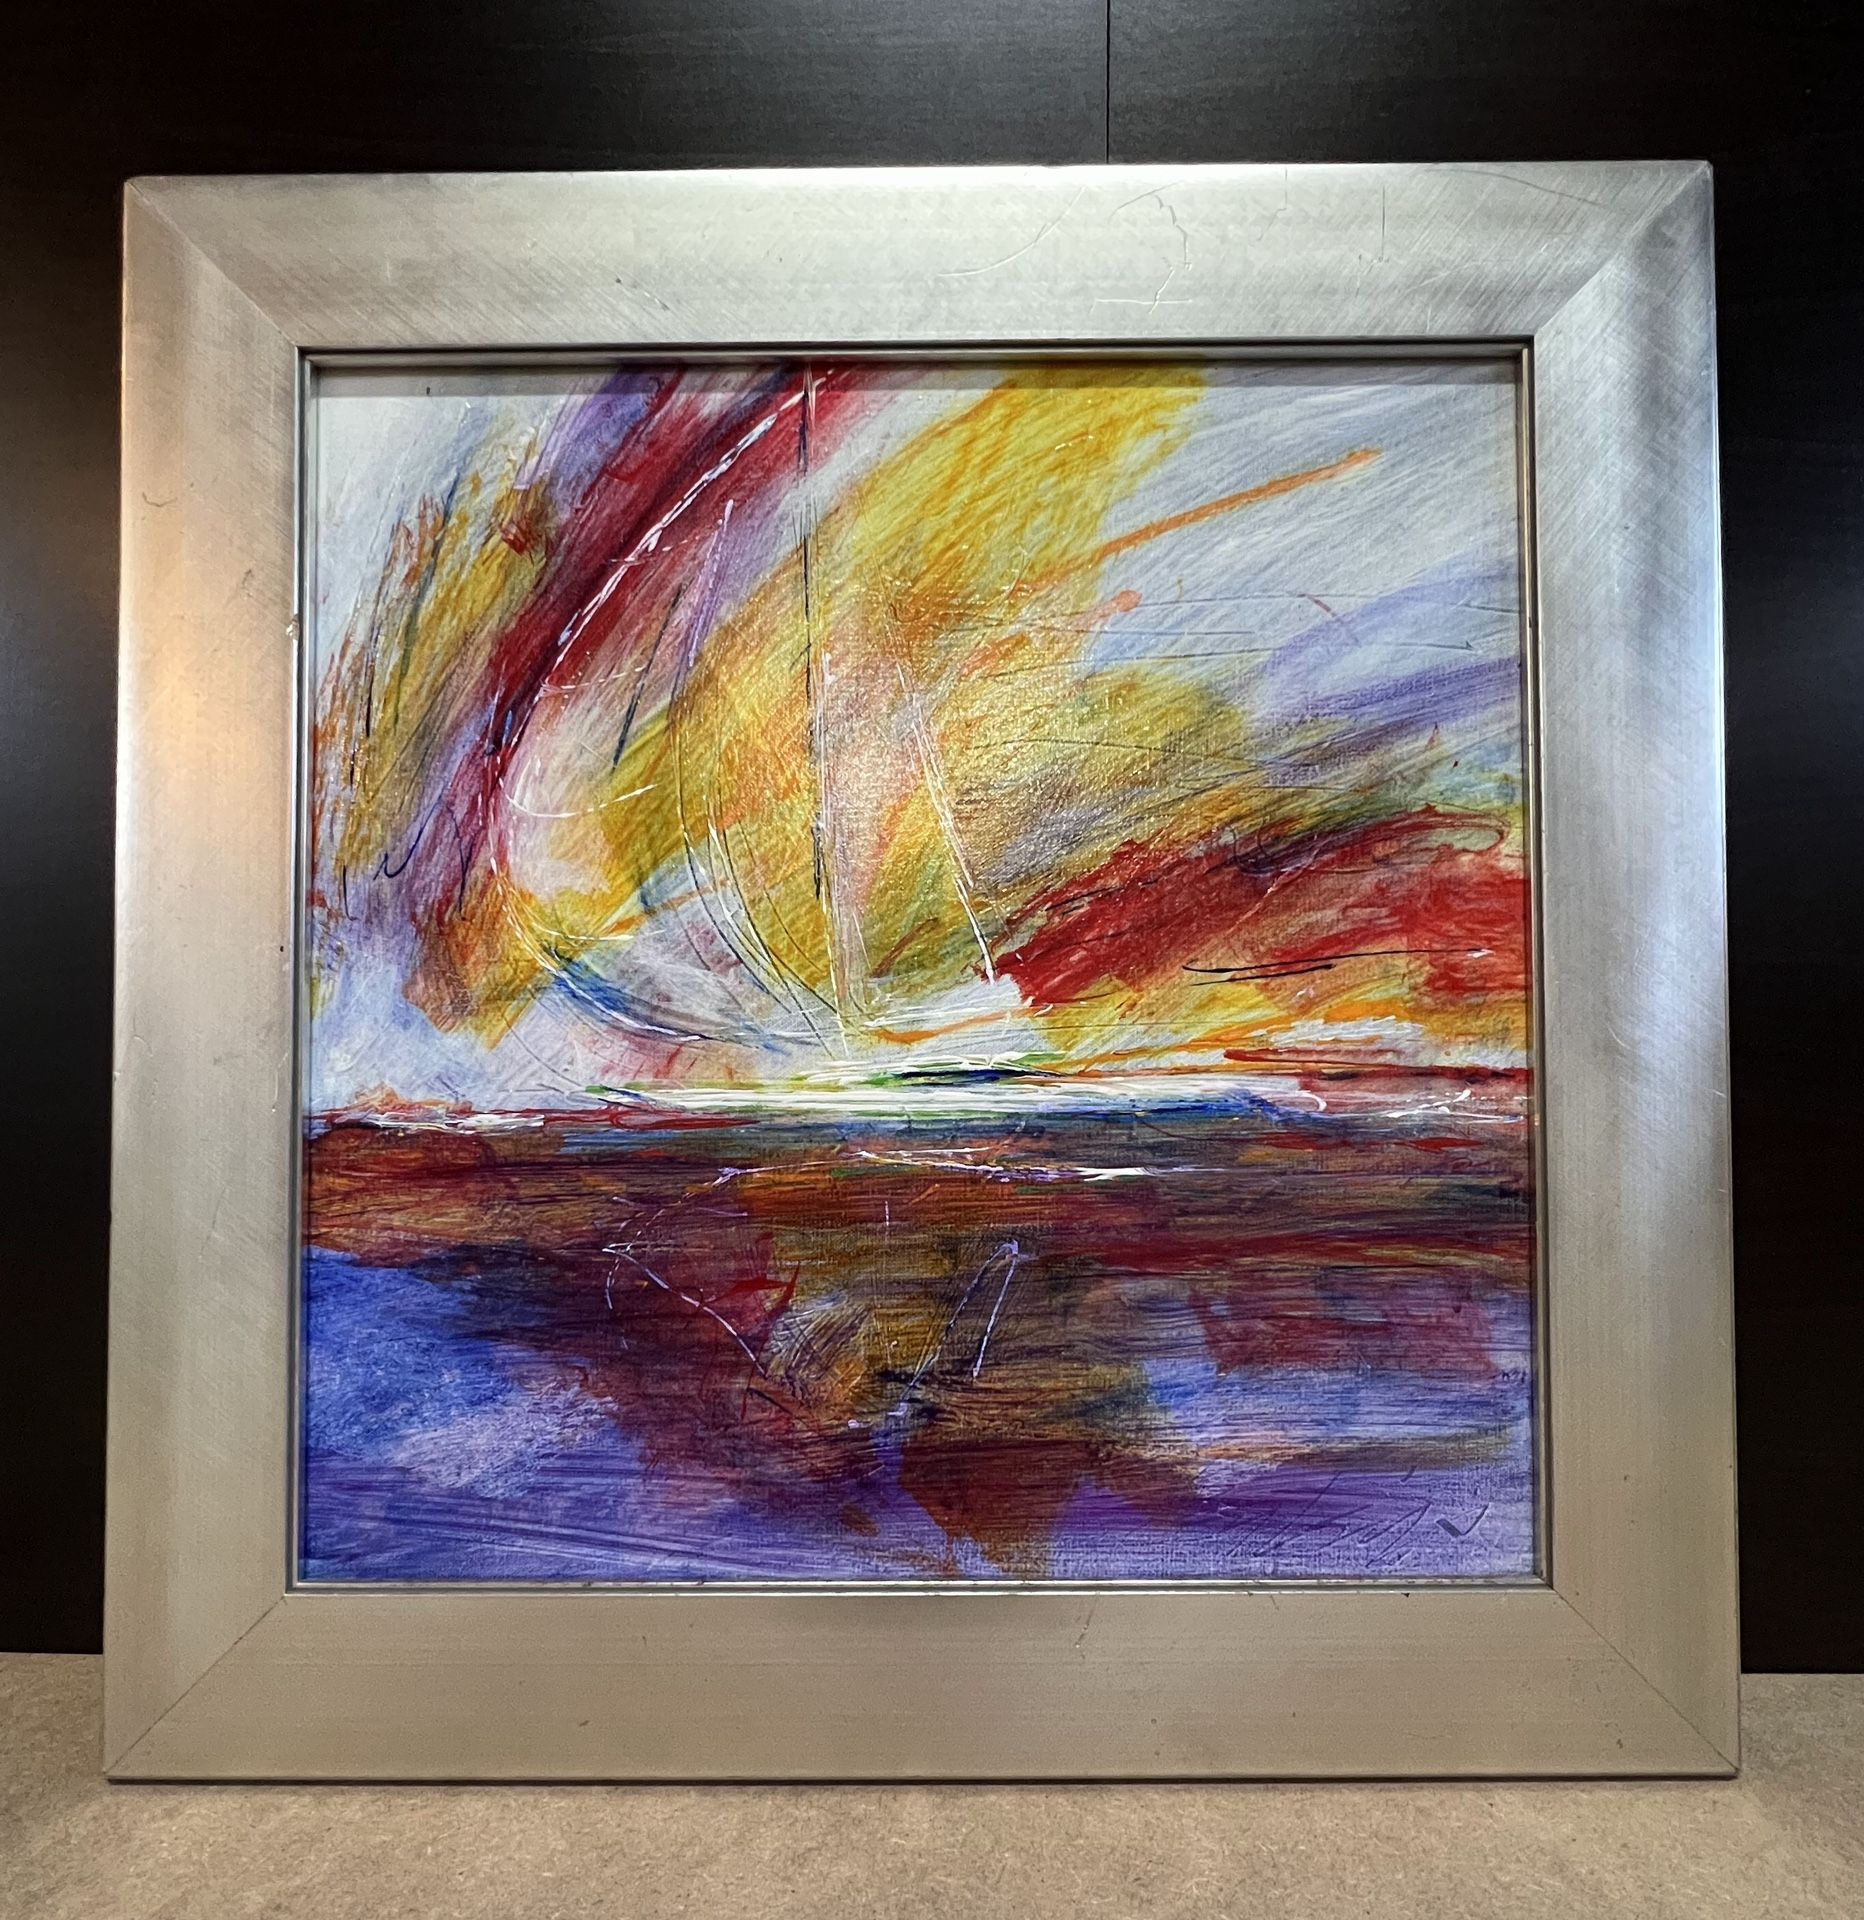 30% off SALE Abstract Oil painting of “Afternoon Sail” Signed &Framed 